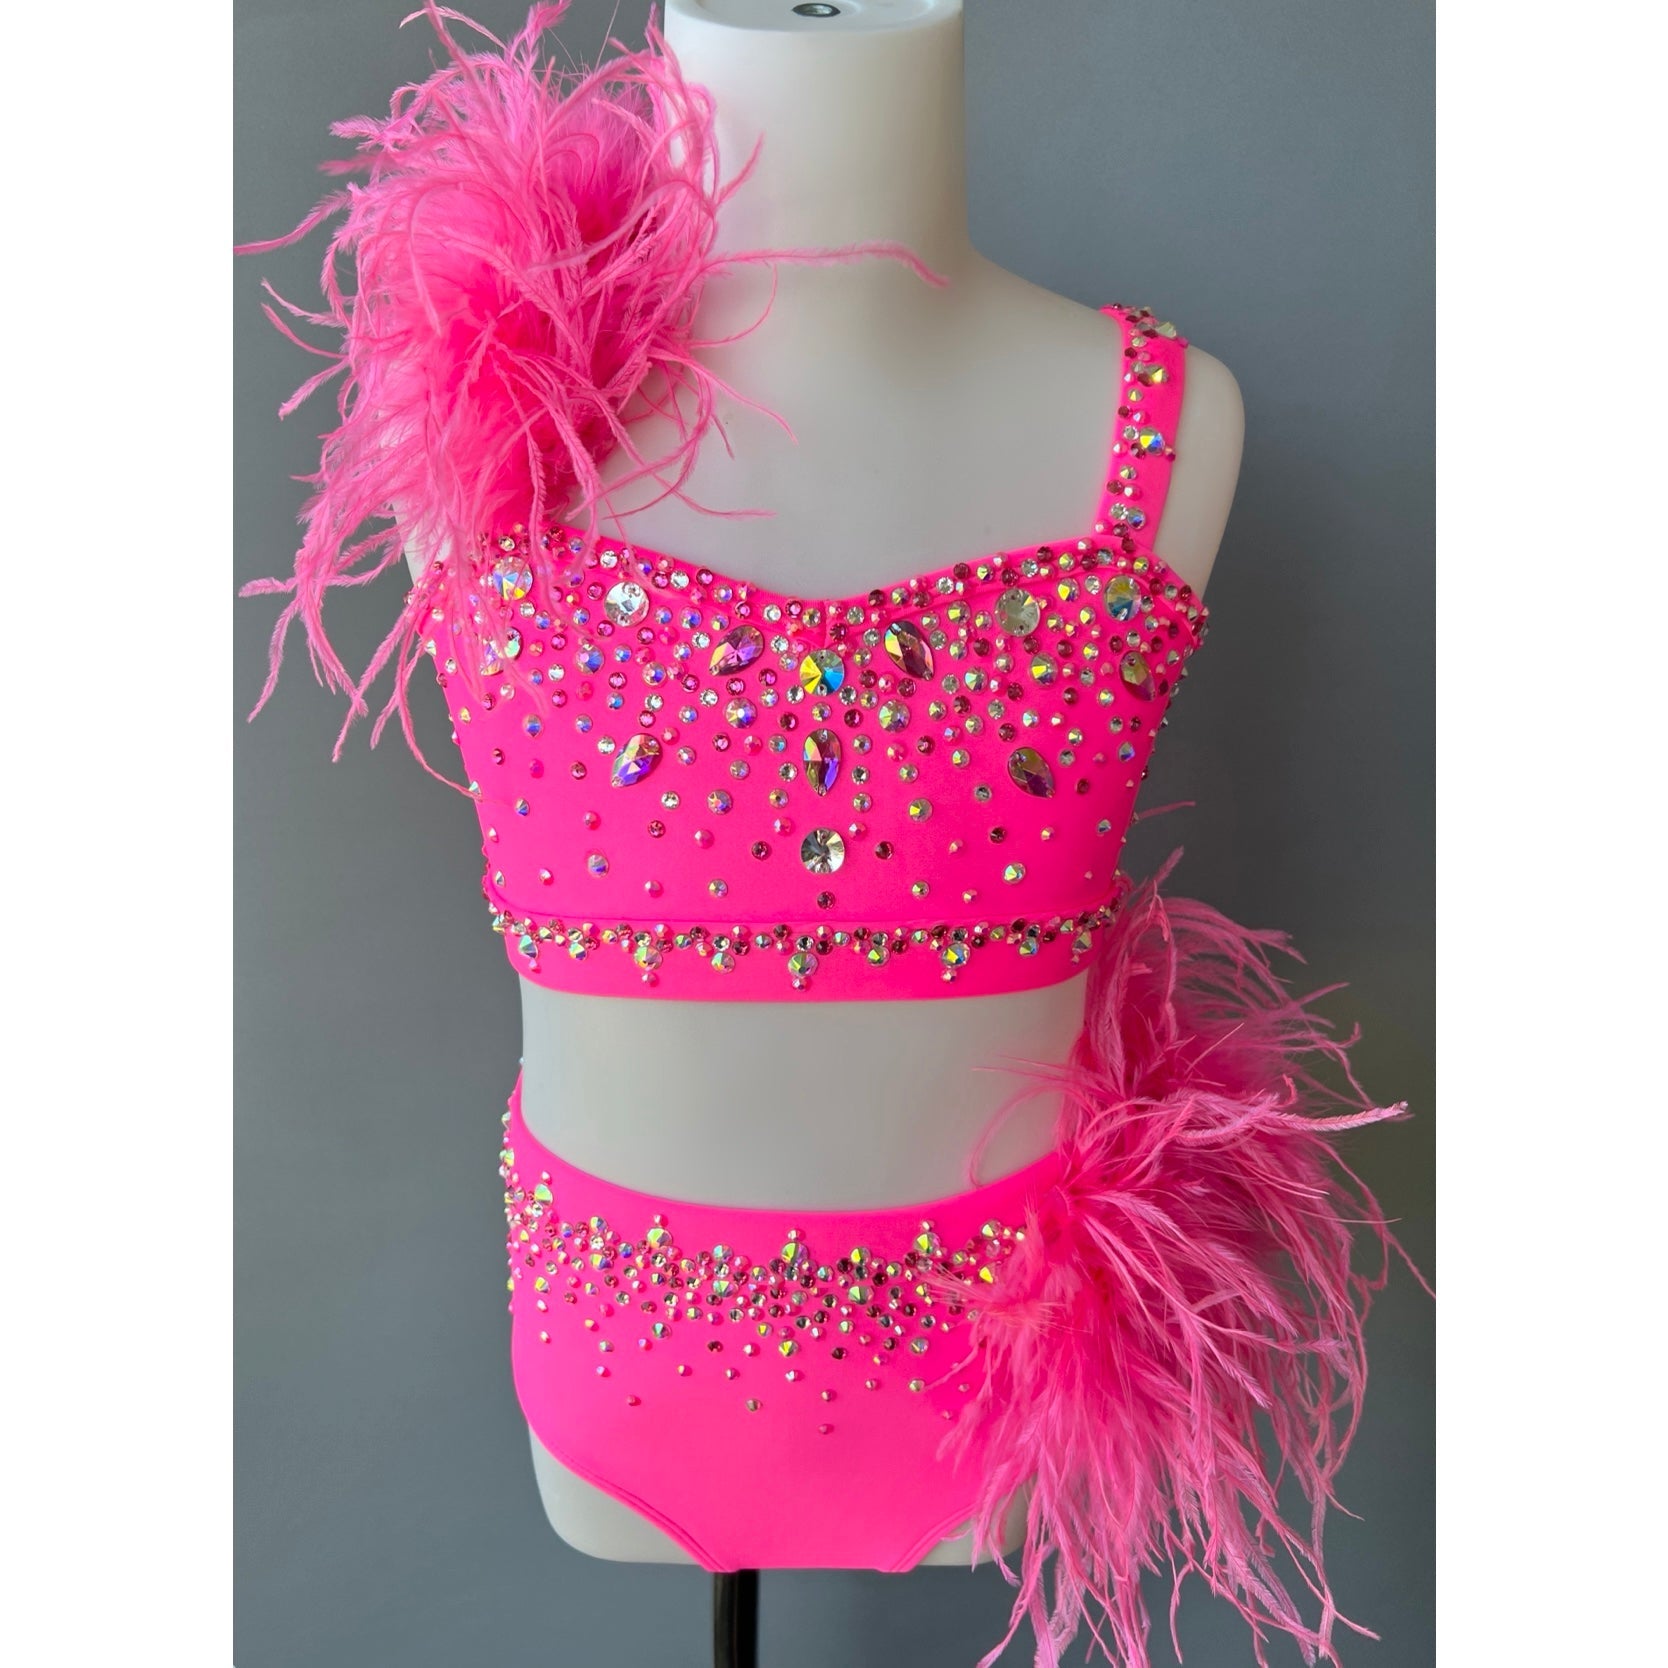 dance costumes for kids